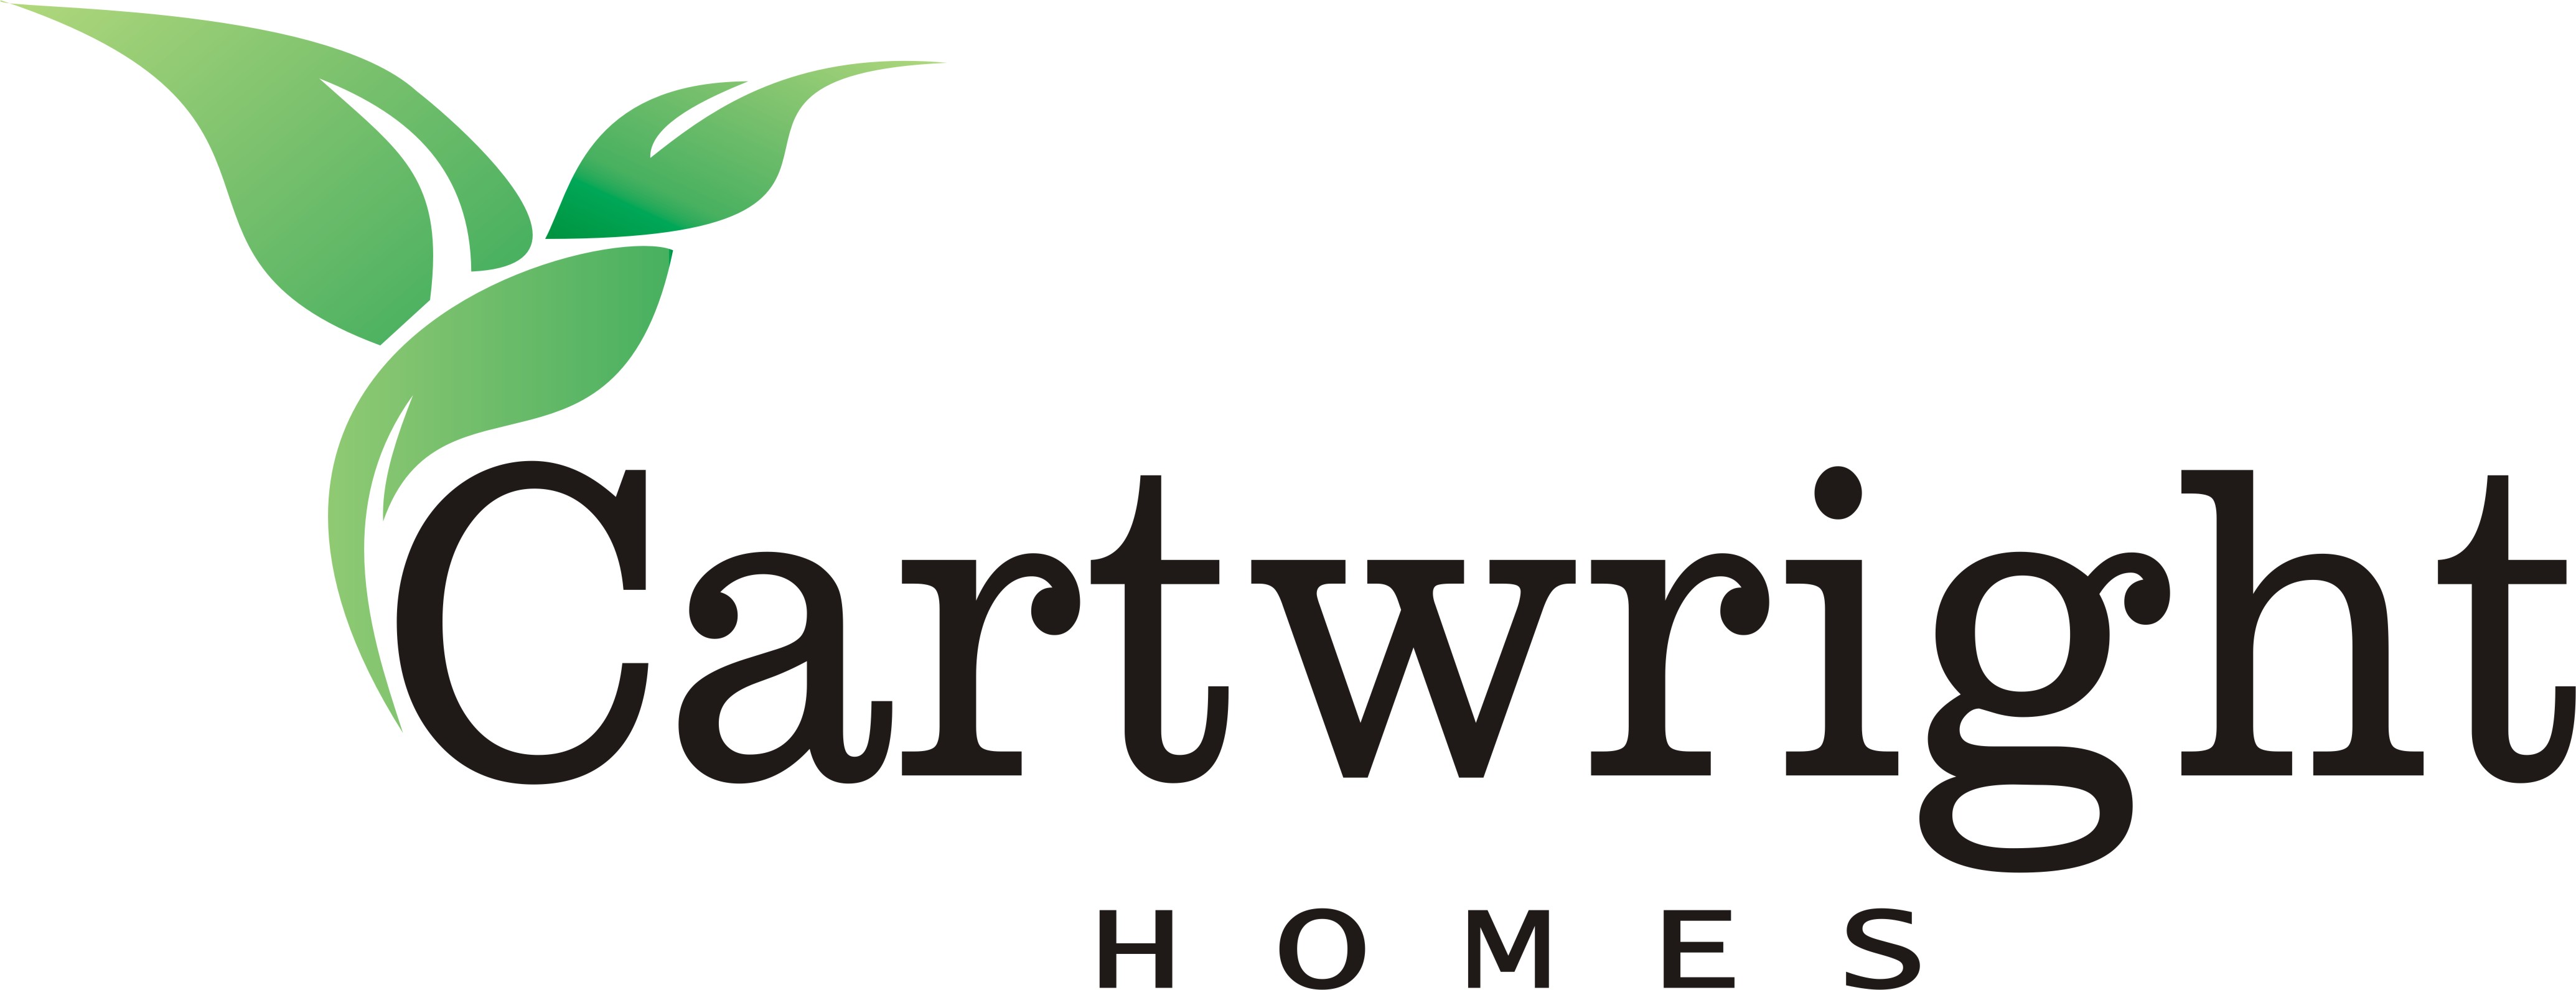 We would like to welcome Cartwright Homes to ContactBuilder.